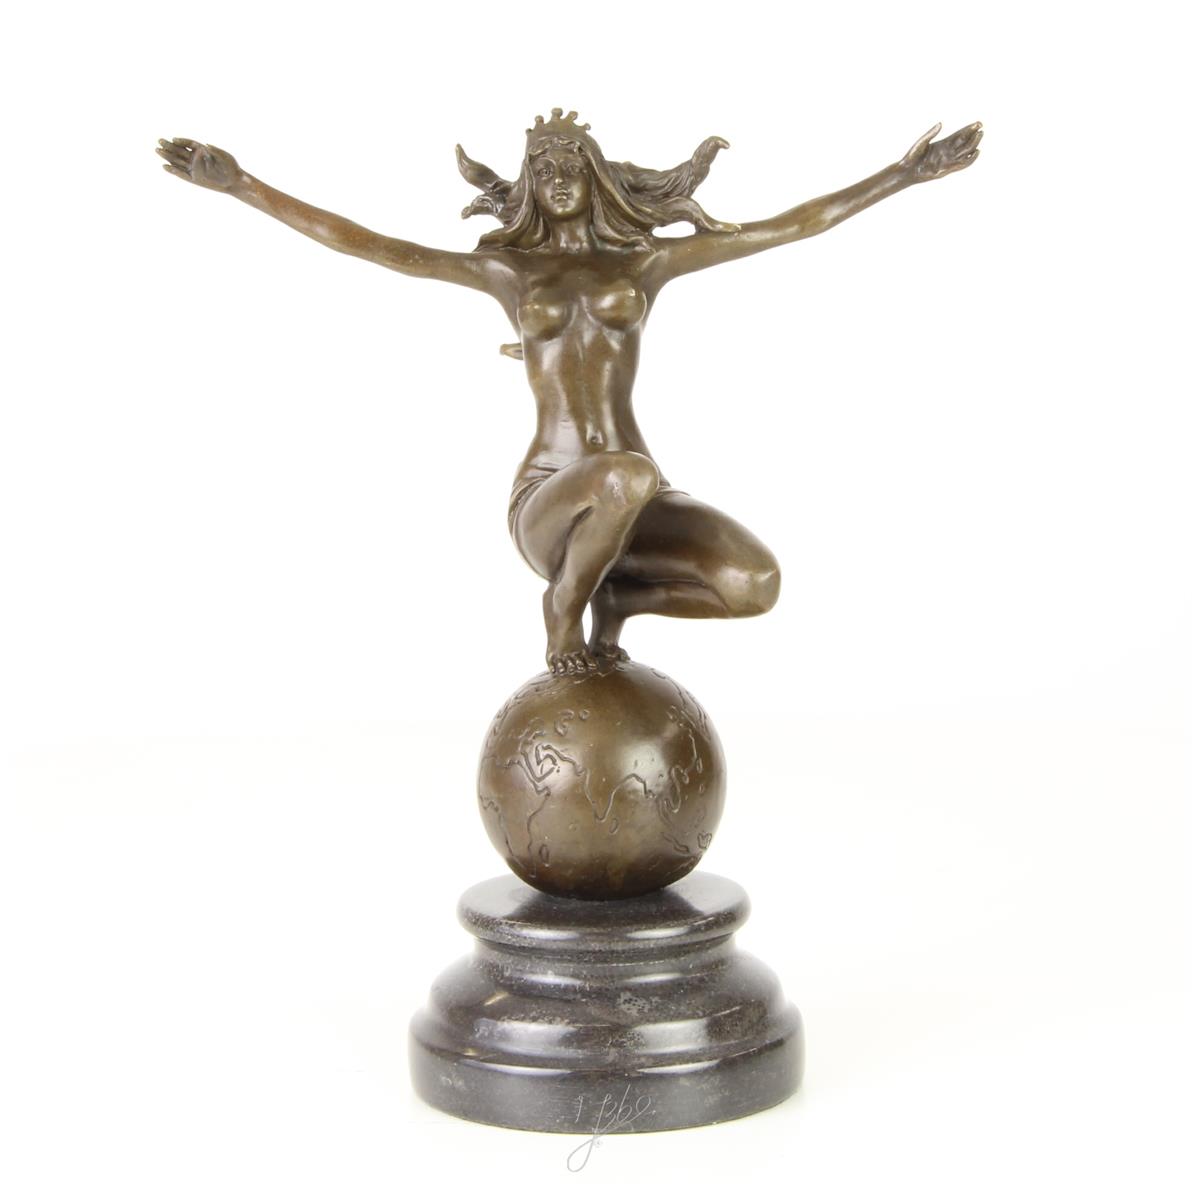 A BRONZE SCULPTURE OF A WOMAN ON TOP OF THE WORLD